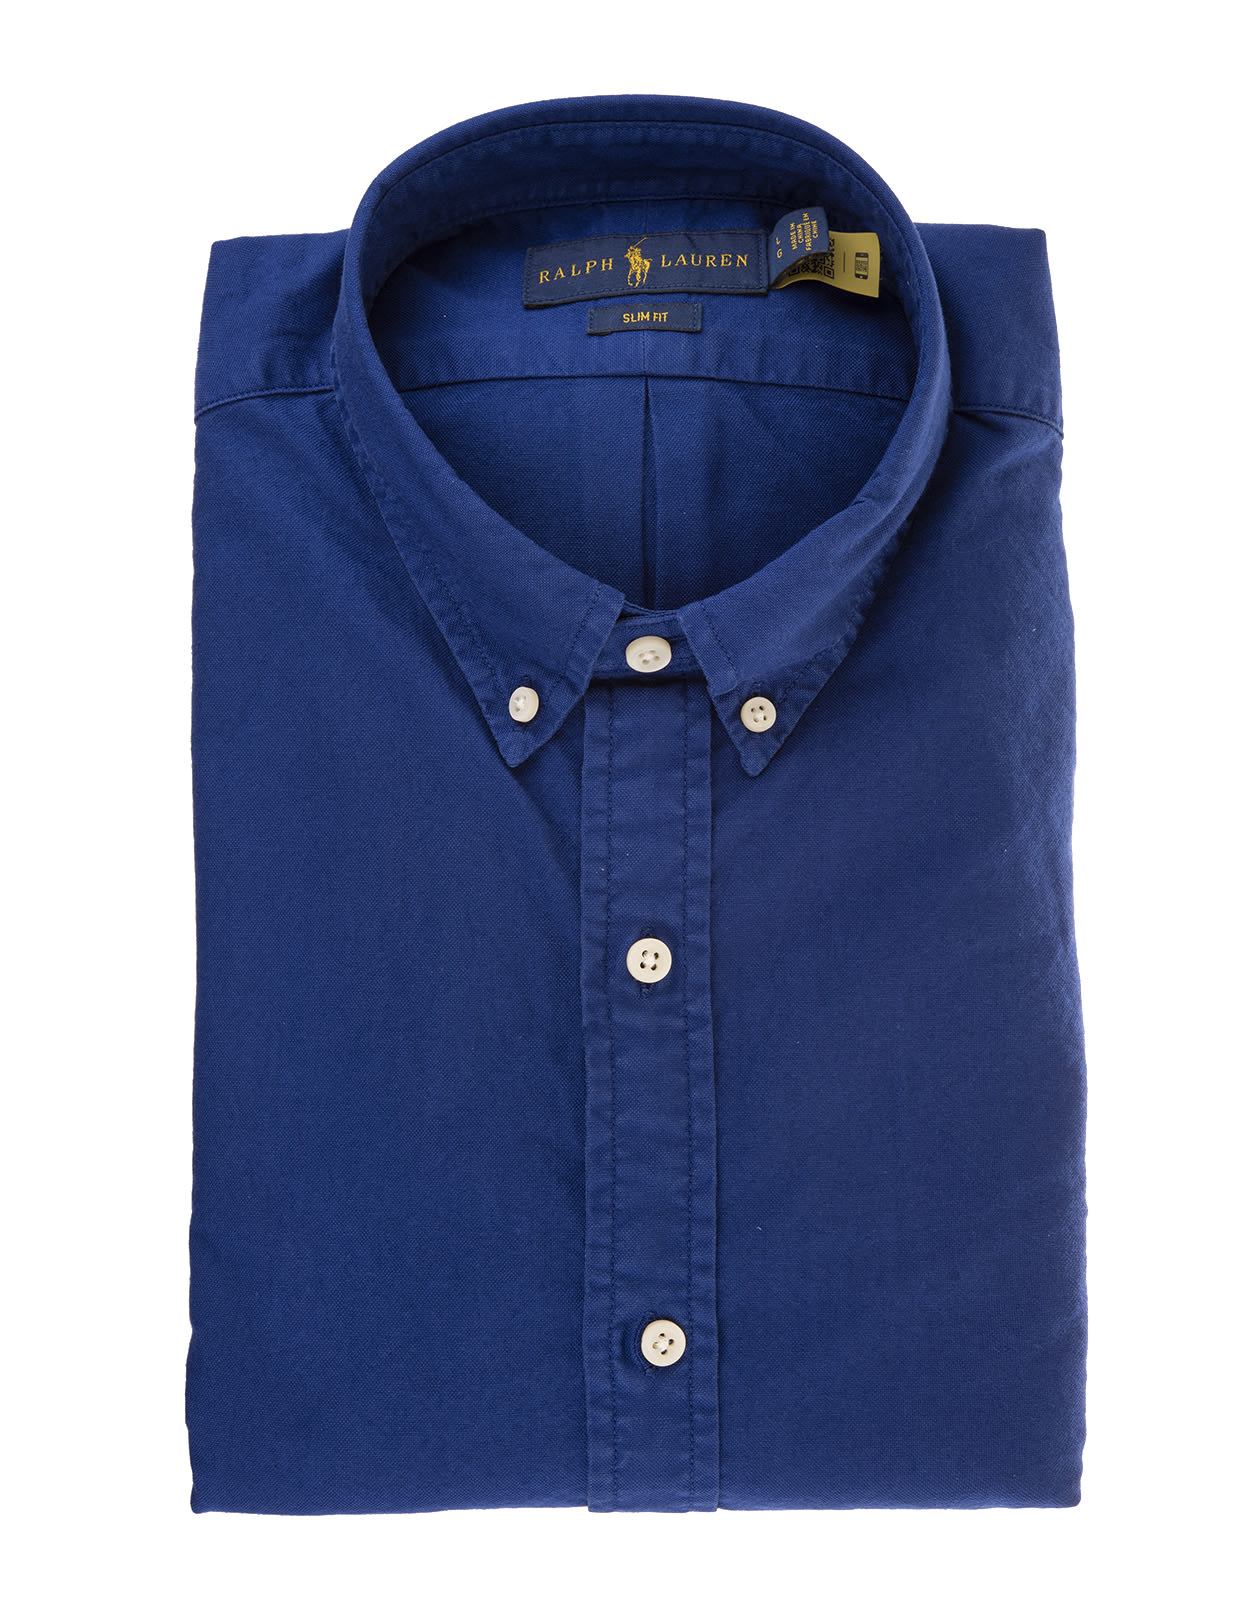 Ralph Lauren Man Slim Fit Royal Blue Shirt With Red Pony